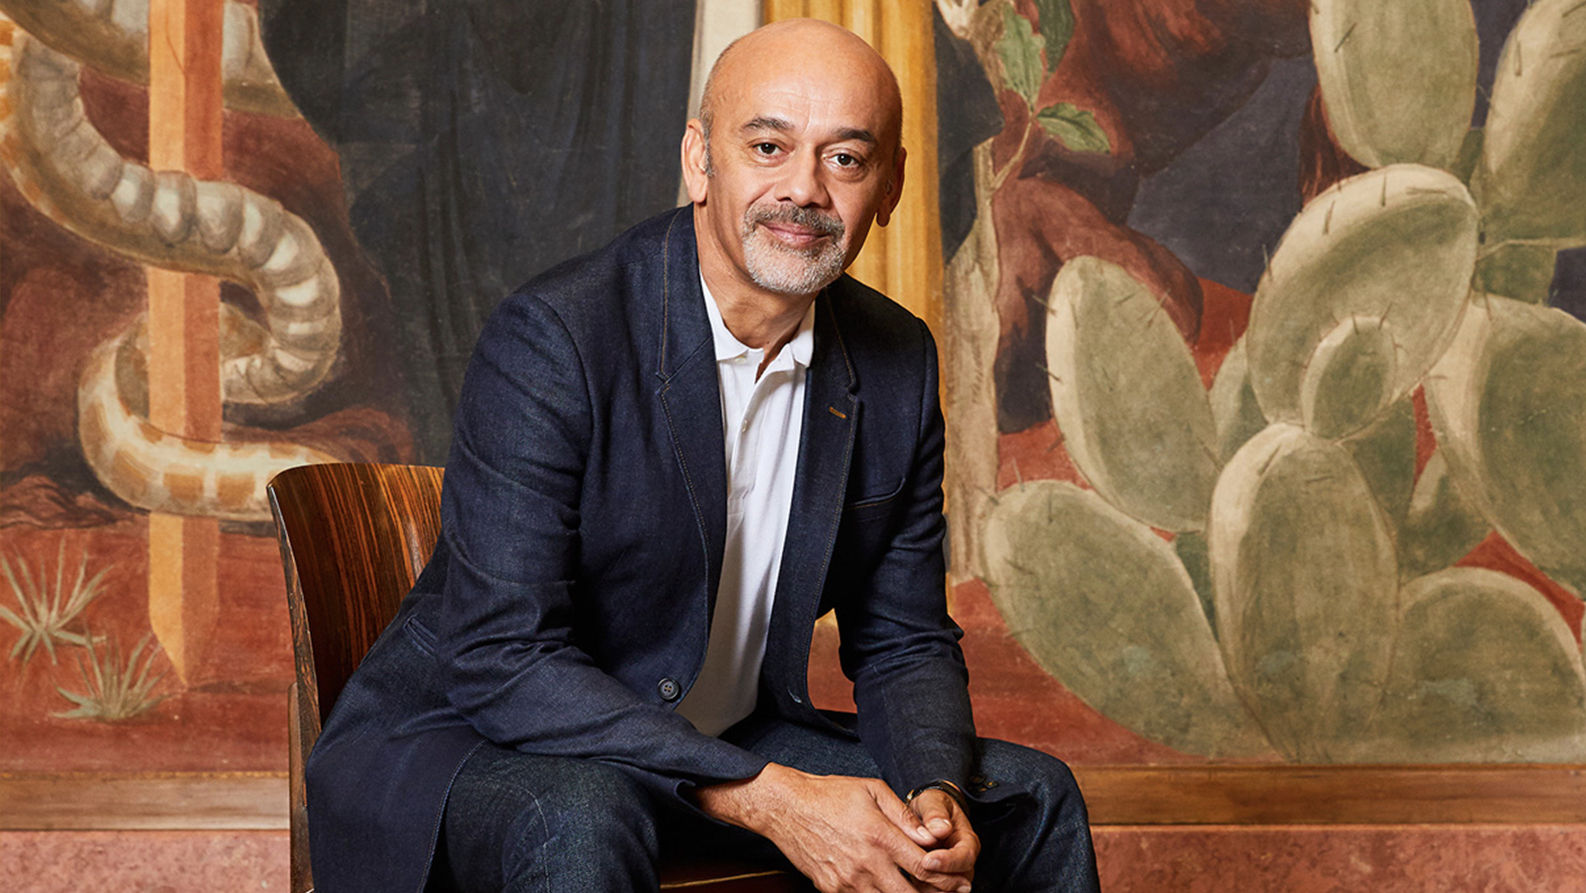 Christian Louboutin: a six-inch heel is a form of freedom